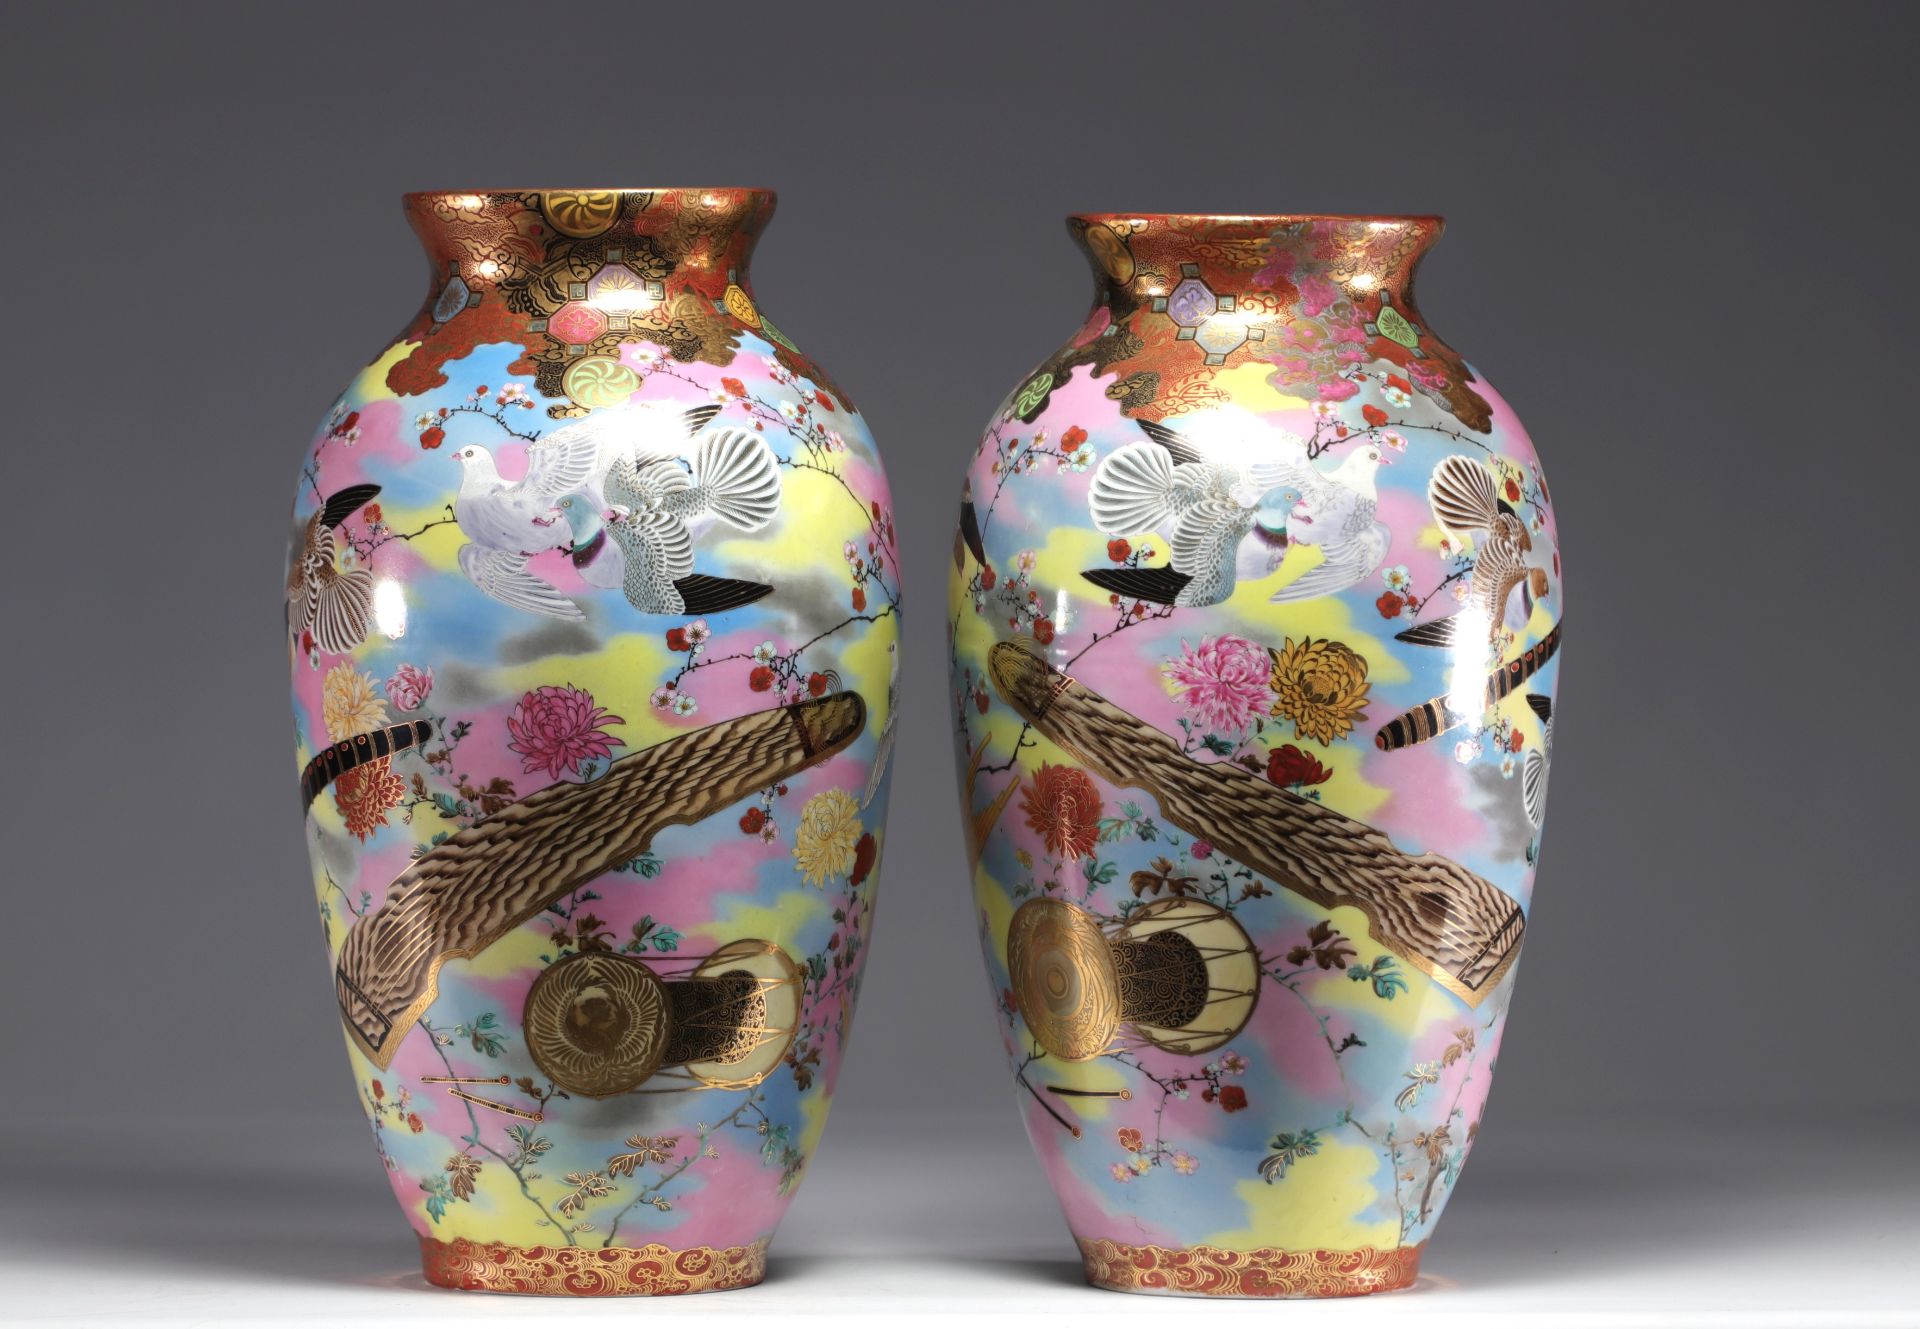 Japan - A pair of Satsuma vases with radiant doves, pigeons and flowers, Meiji period.Â - Image 3 of 8